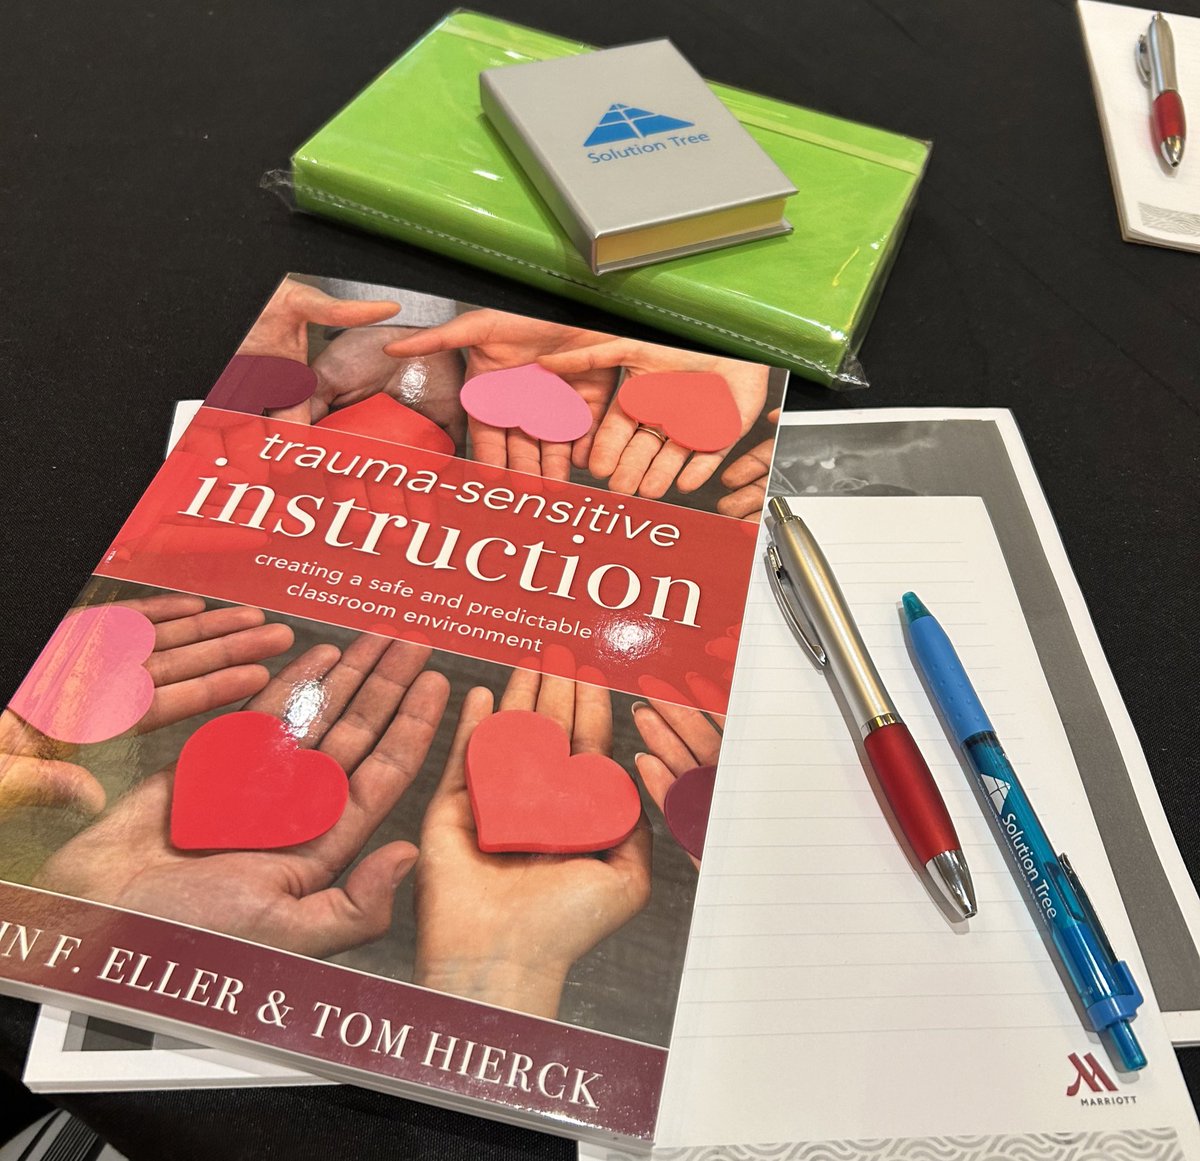 Excited to be in ATL for a Trauma-Sensitive Instruction workshop with @SolutionTree this morning!